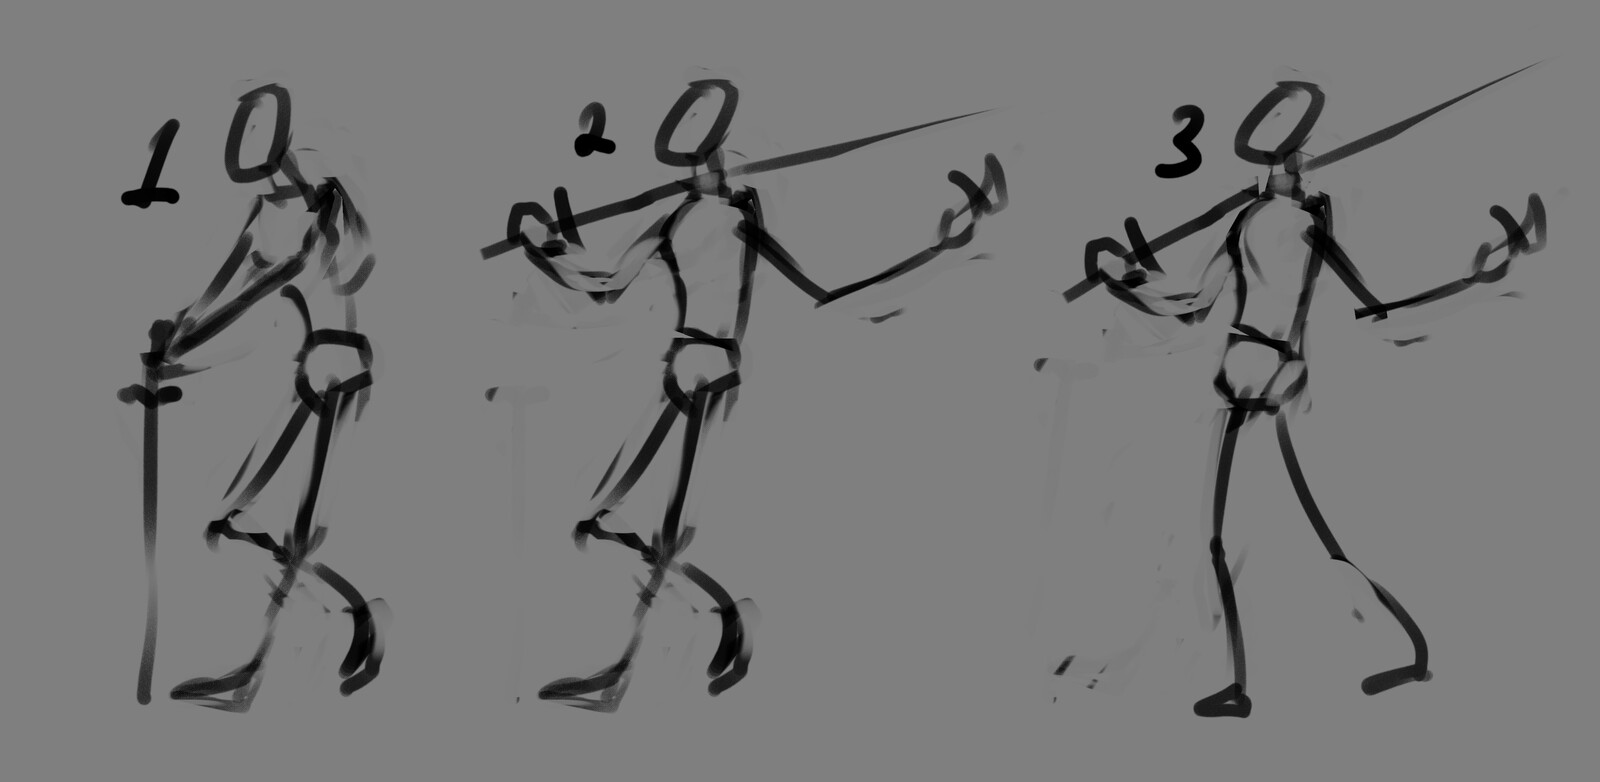 initial pose options. 1 is what client requested, 2 and 3 are inspired by generic character pose from The Fool tarot cards